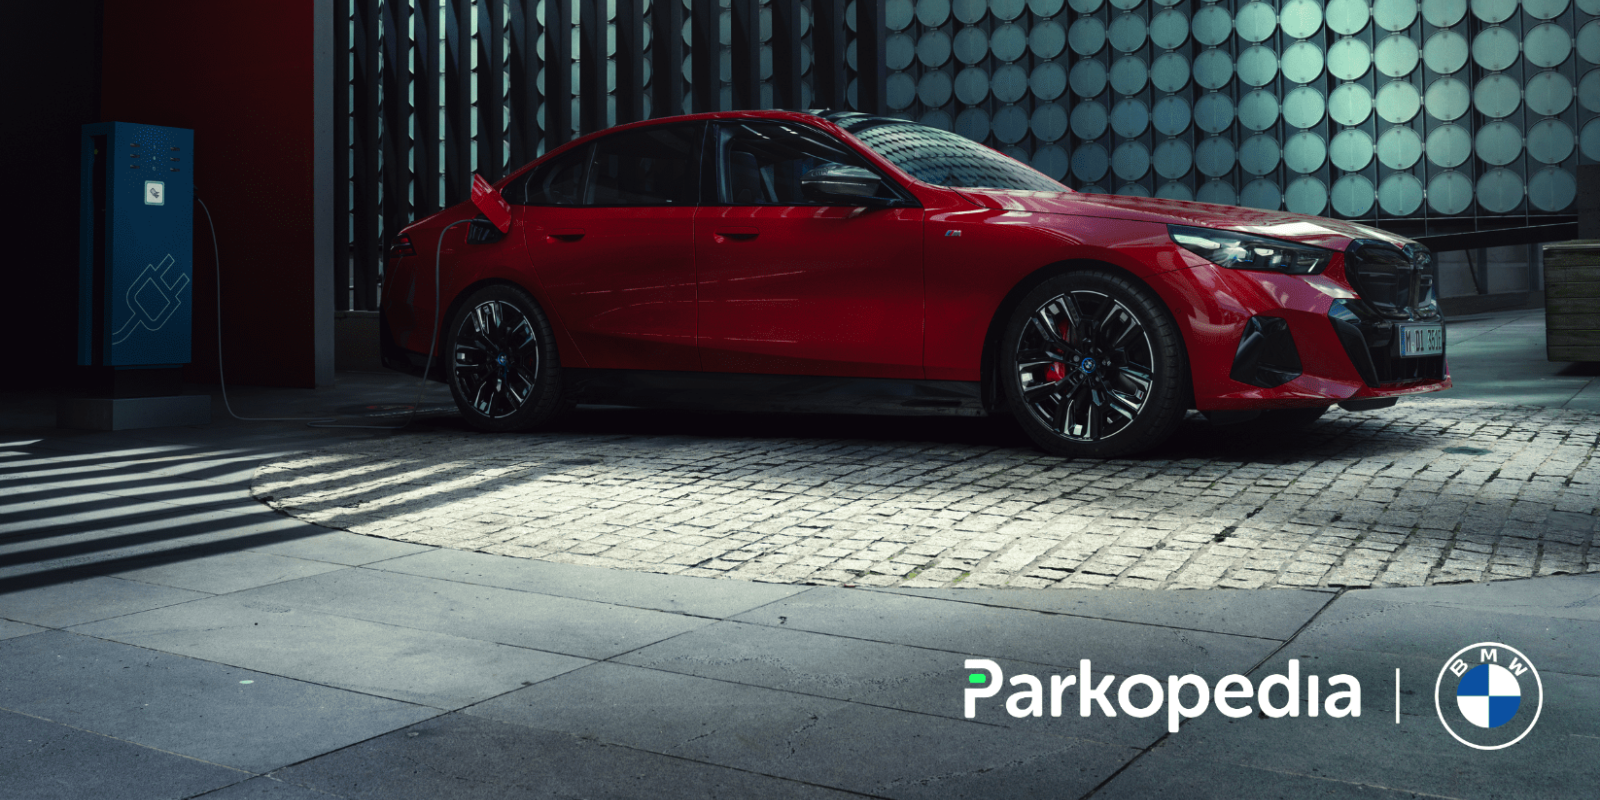 Parkopedia To Improve Public EV Charging Experience For BMW & MINI drivers